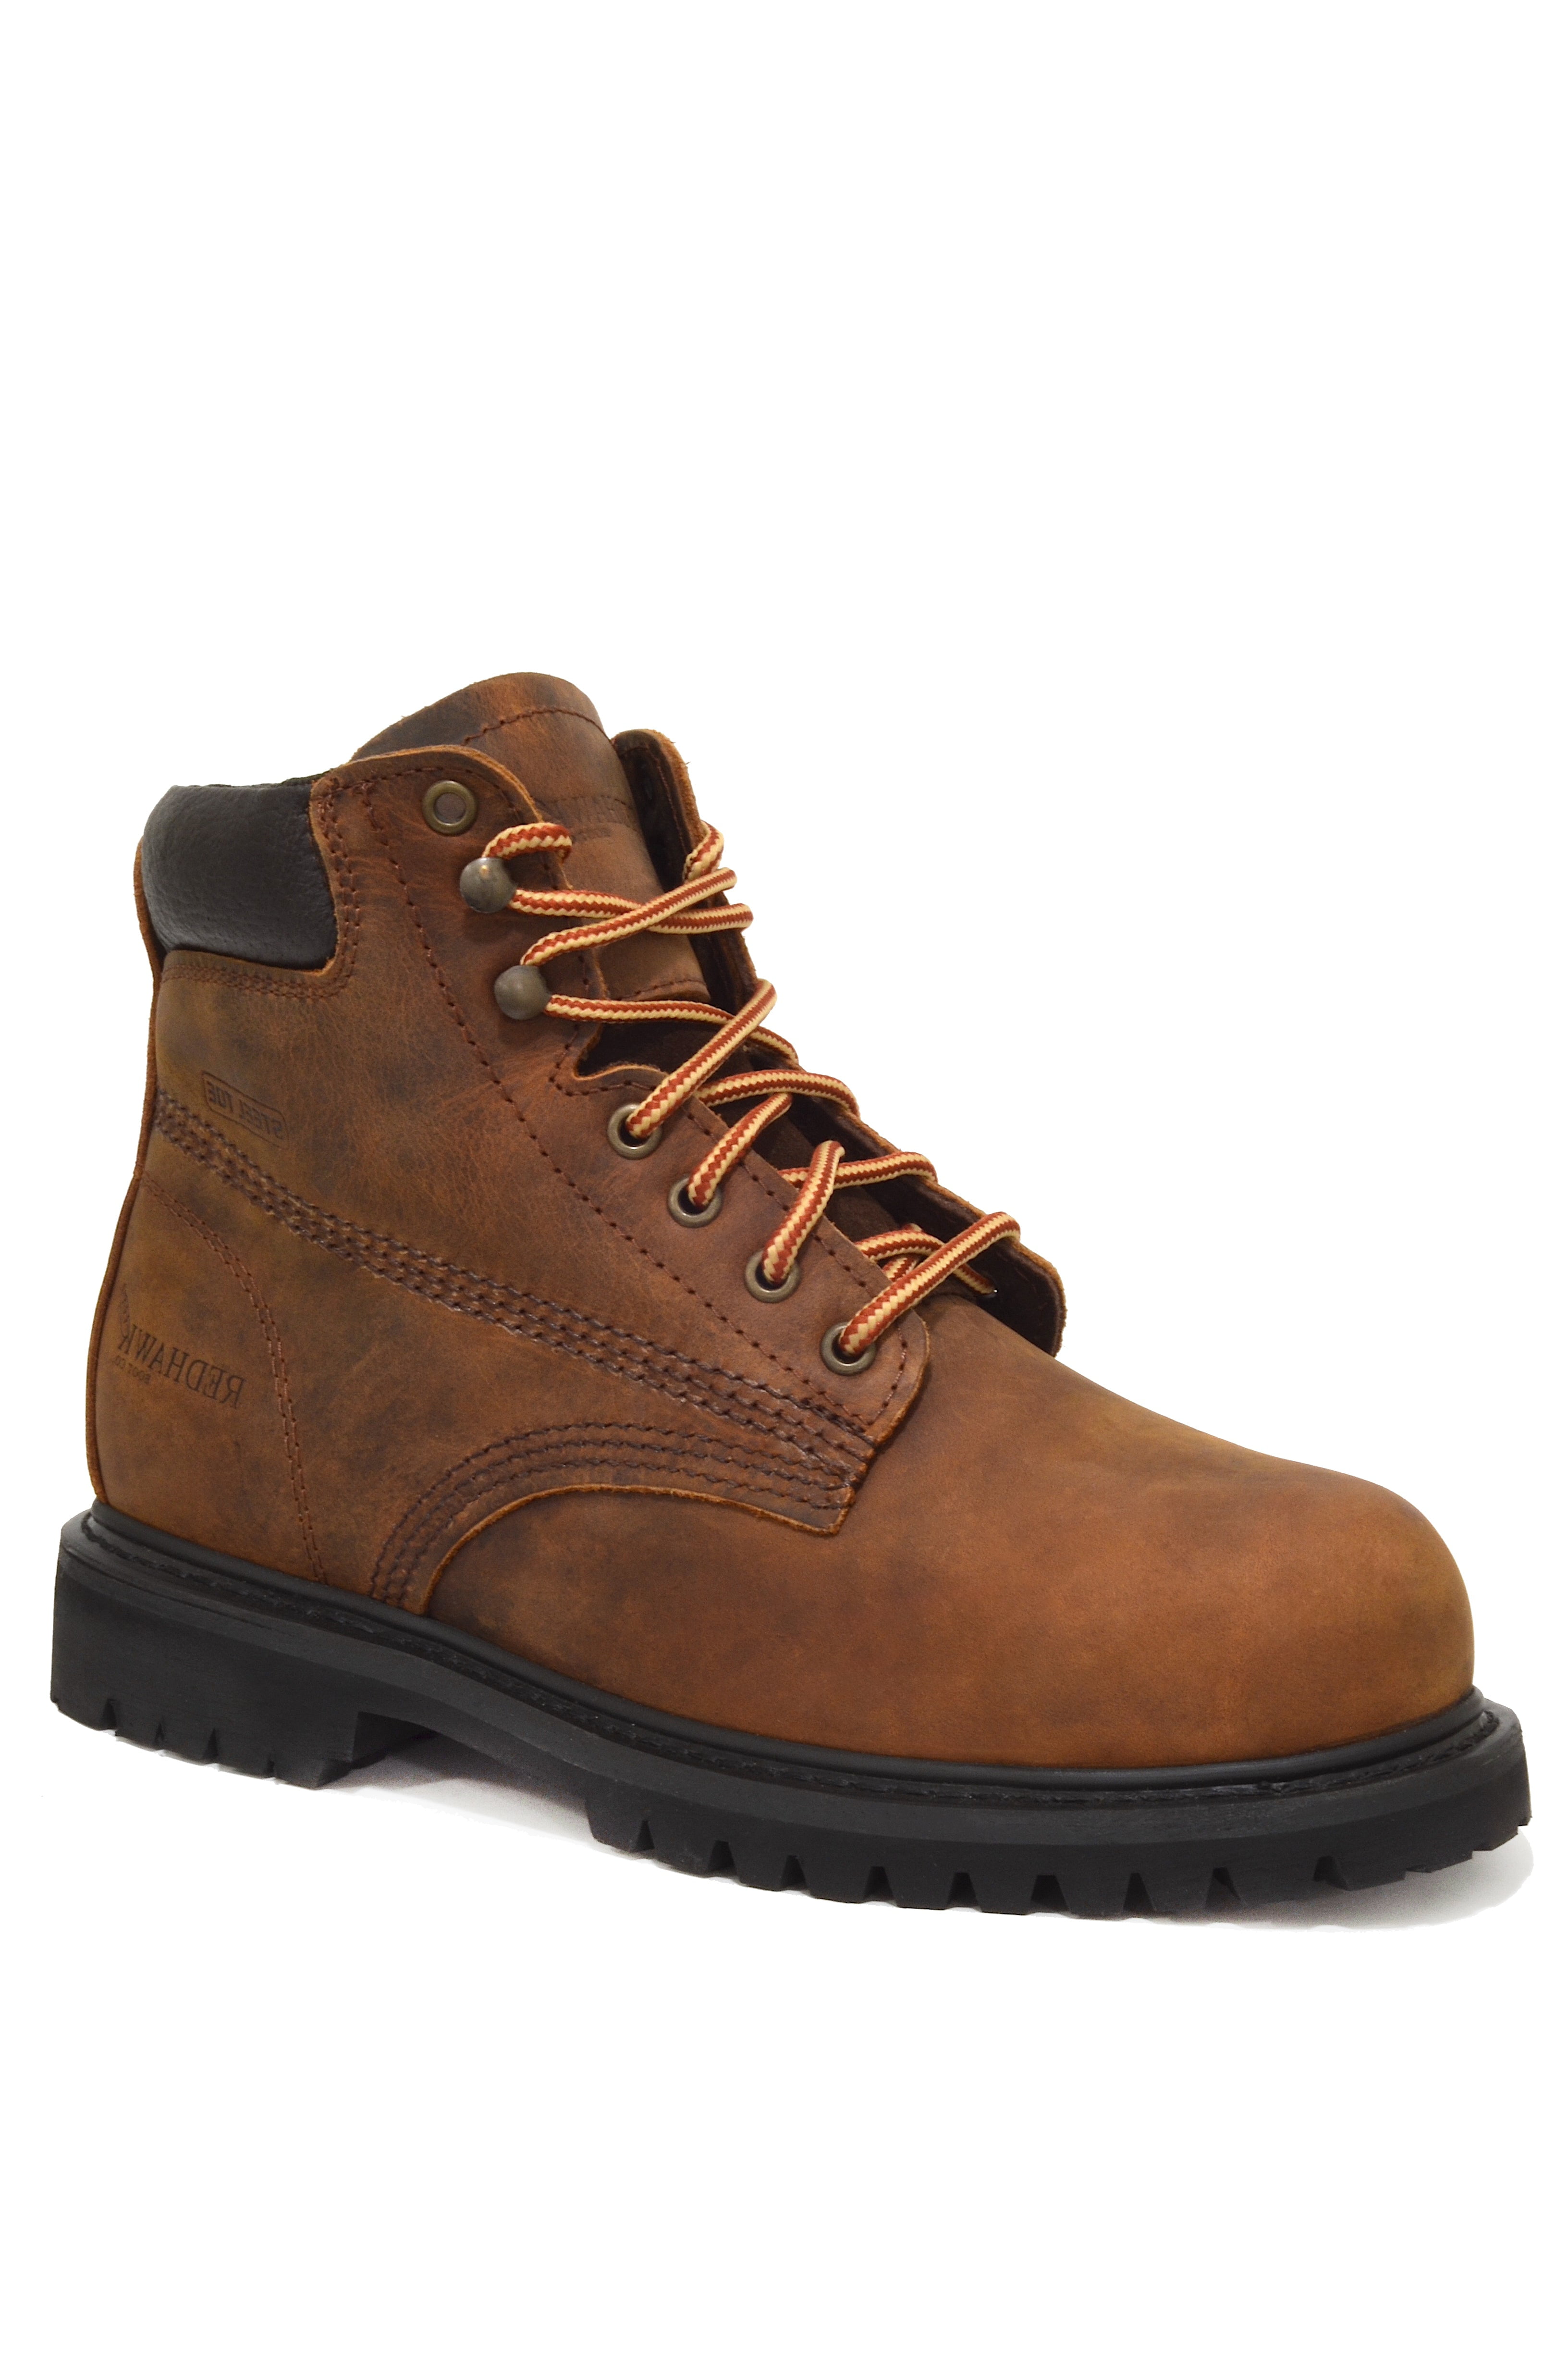 RedHawk Boot Co. Traction Men's Soft Toe 6